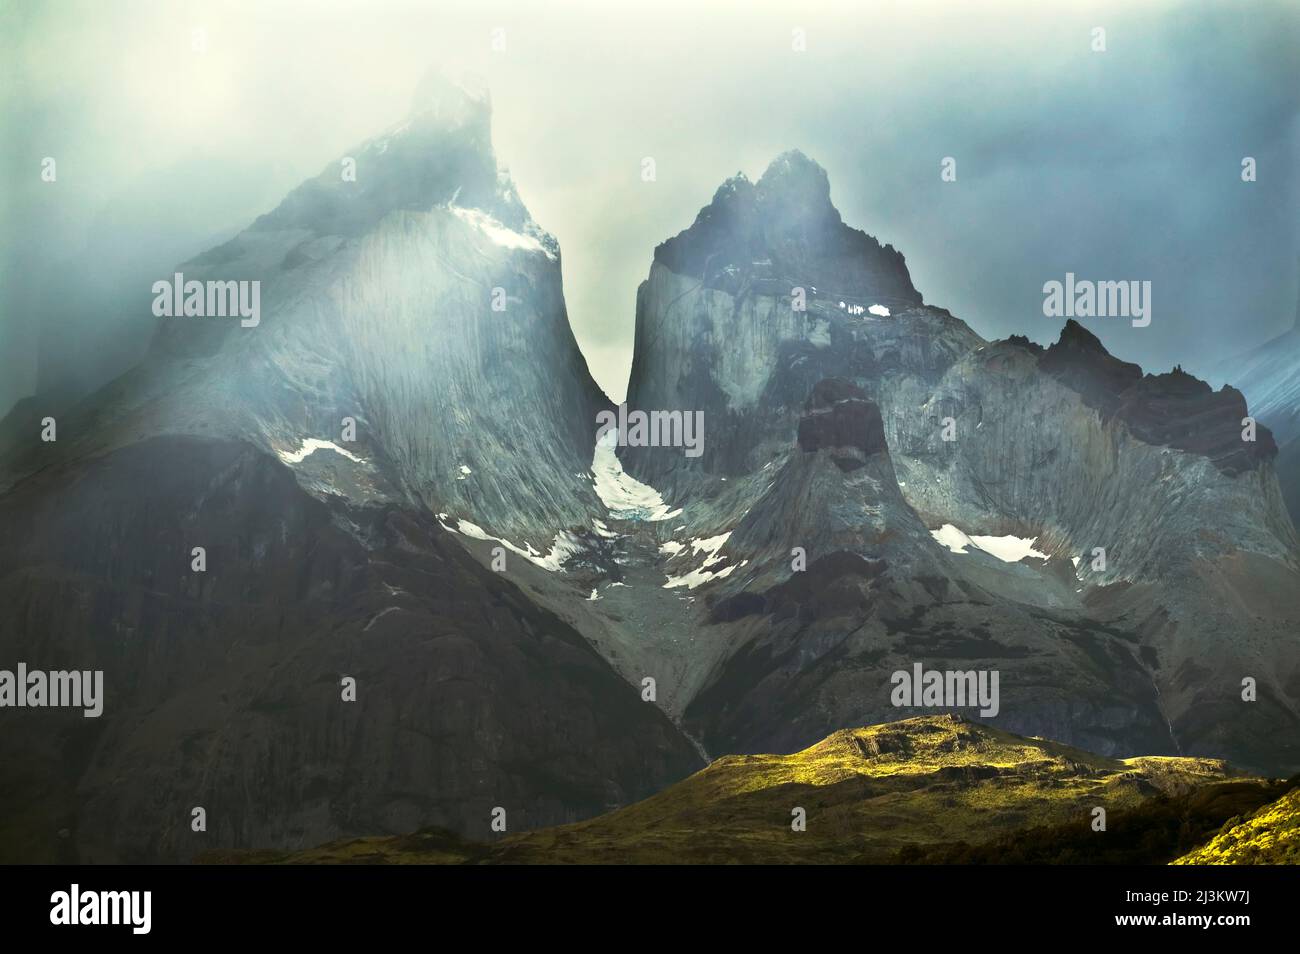 Stormy light on mountains in Torres del Paine, Patagonia, Chile.; Cuernos del Paine, Torres del Paine National Park, Patagonia, Chile. Stock Photo